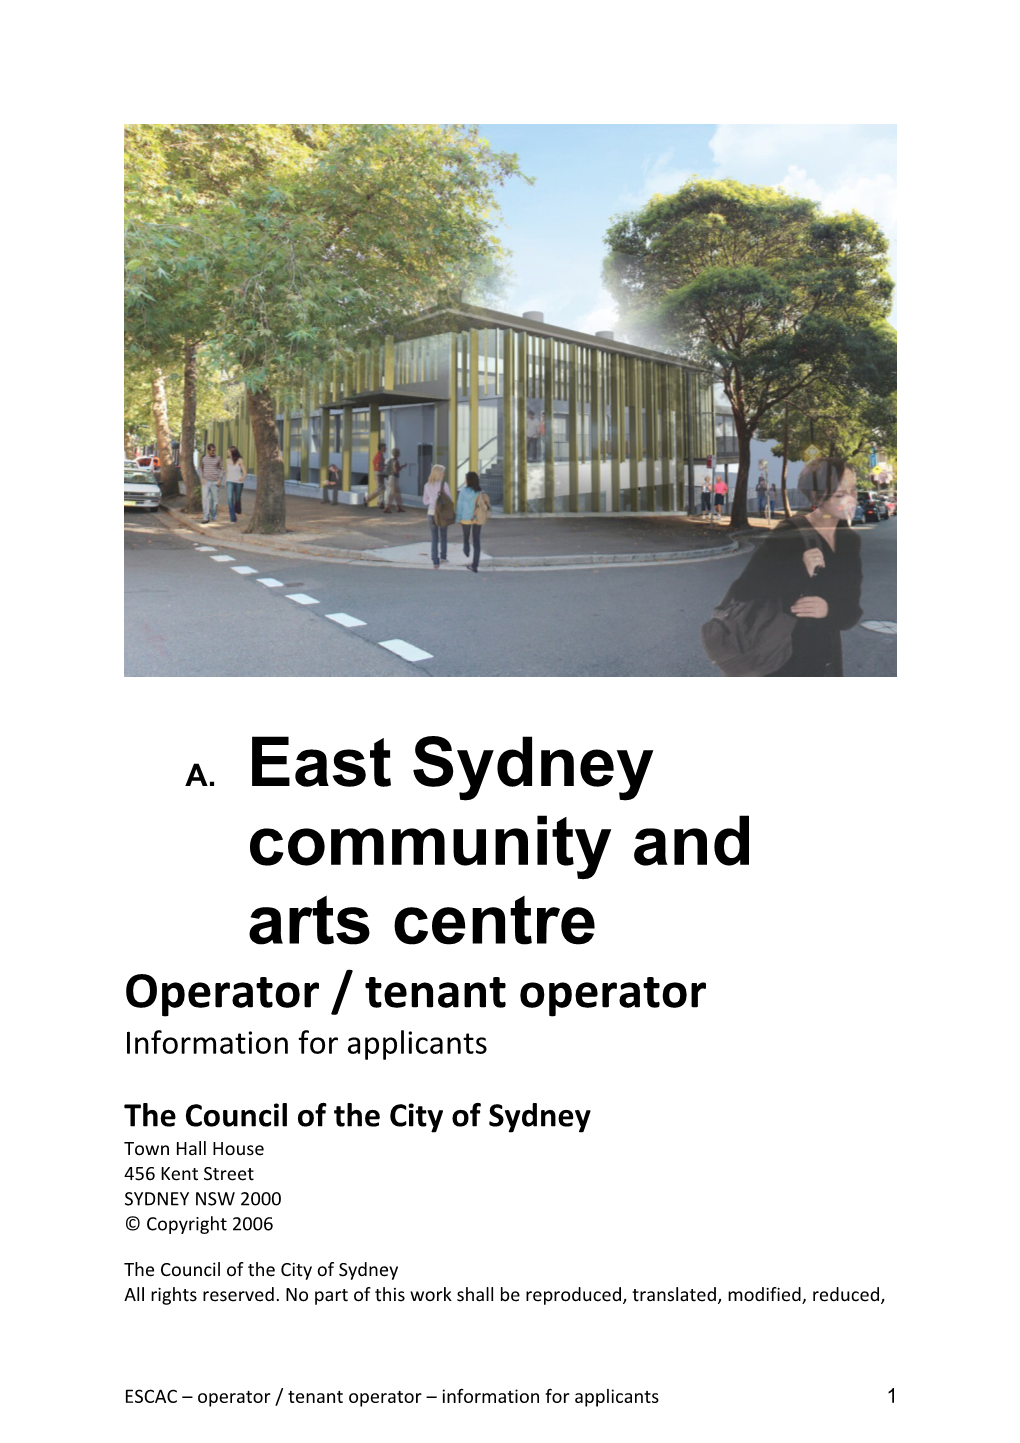 East Sydney Community and Arts Centre